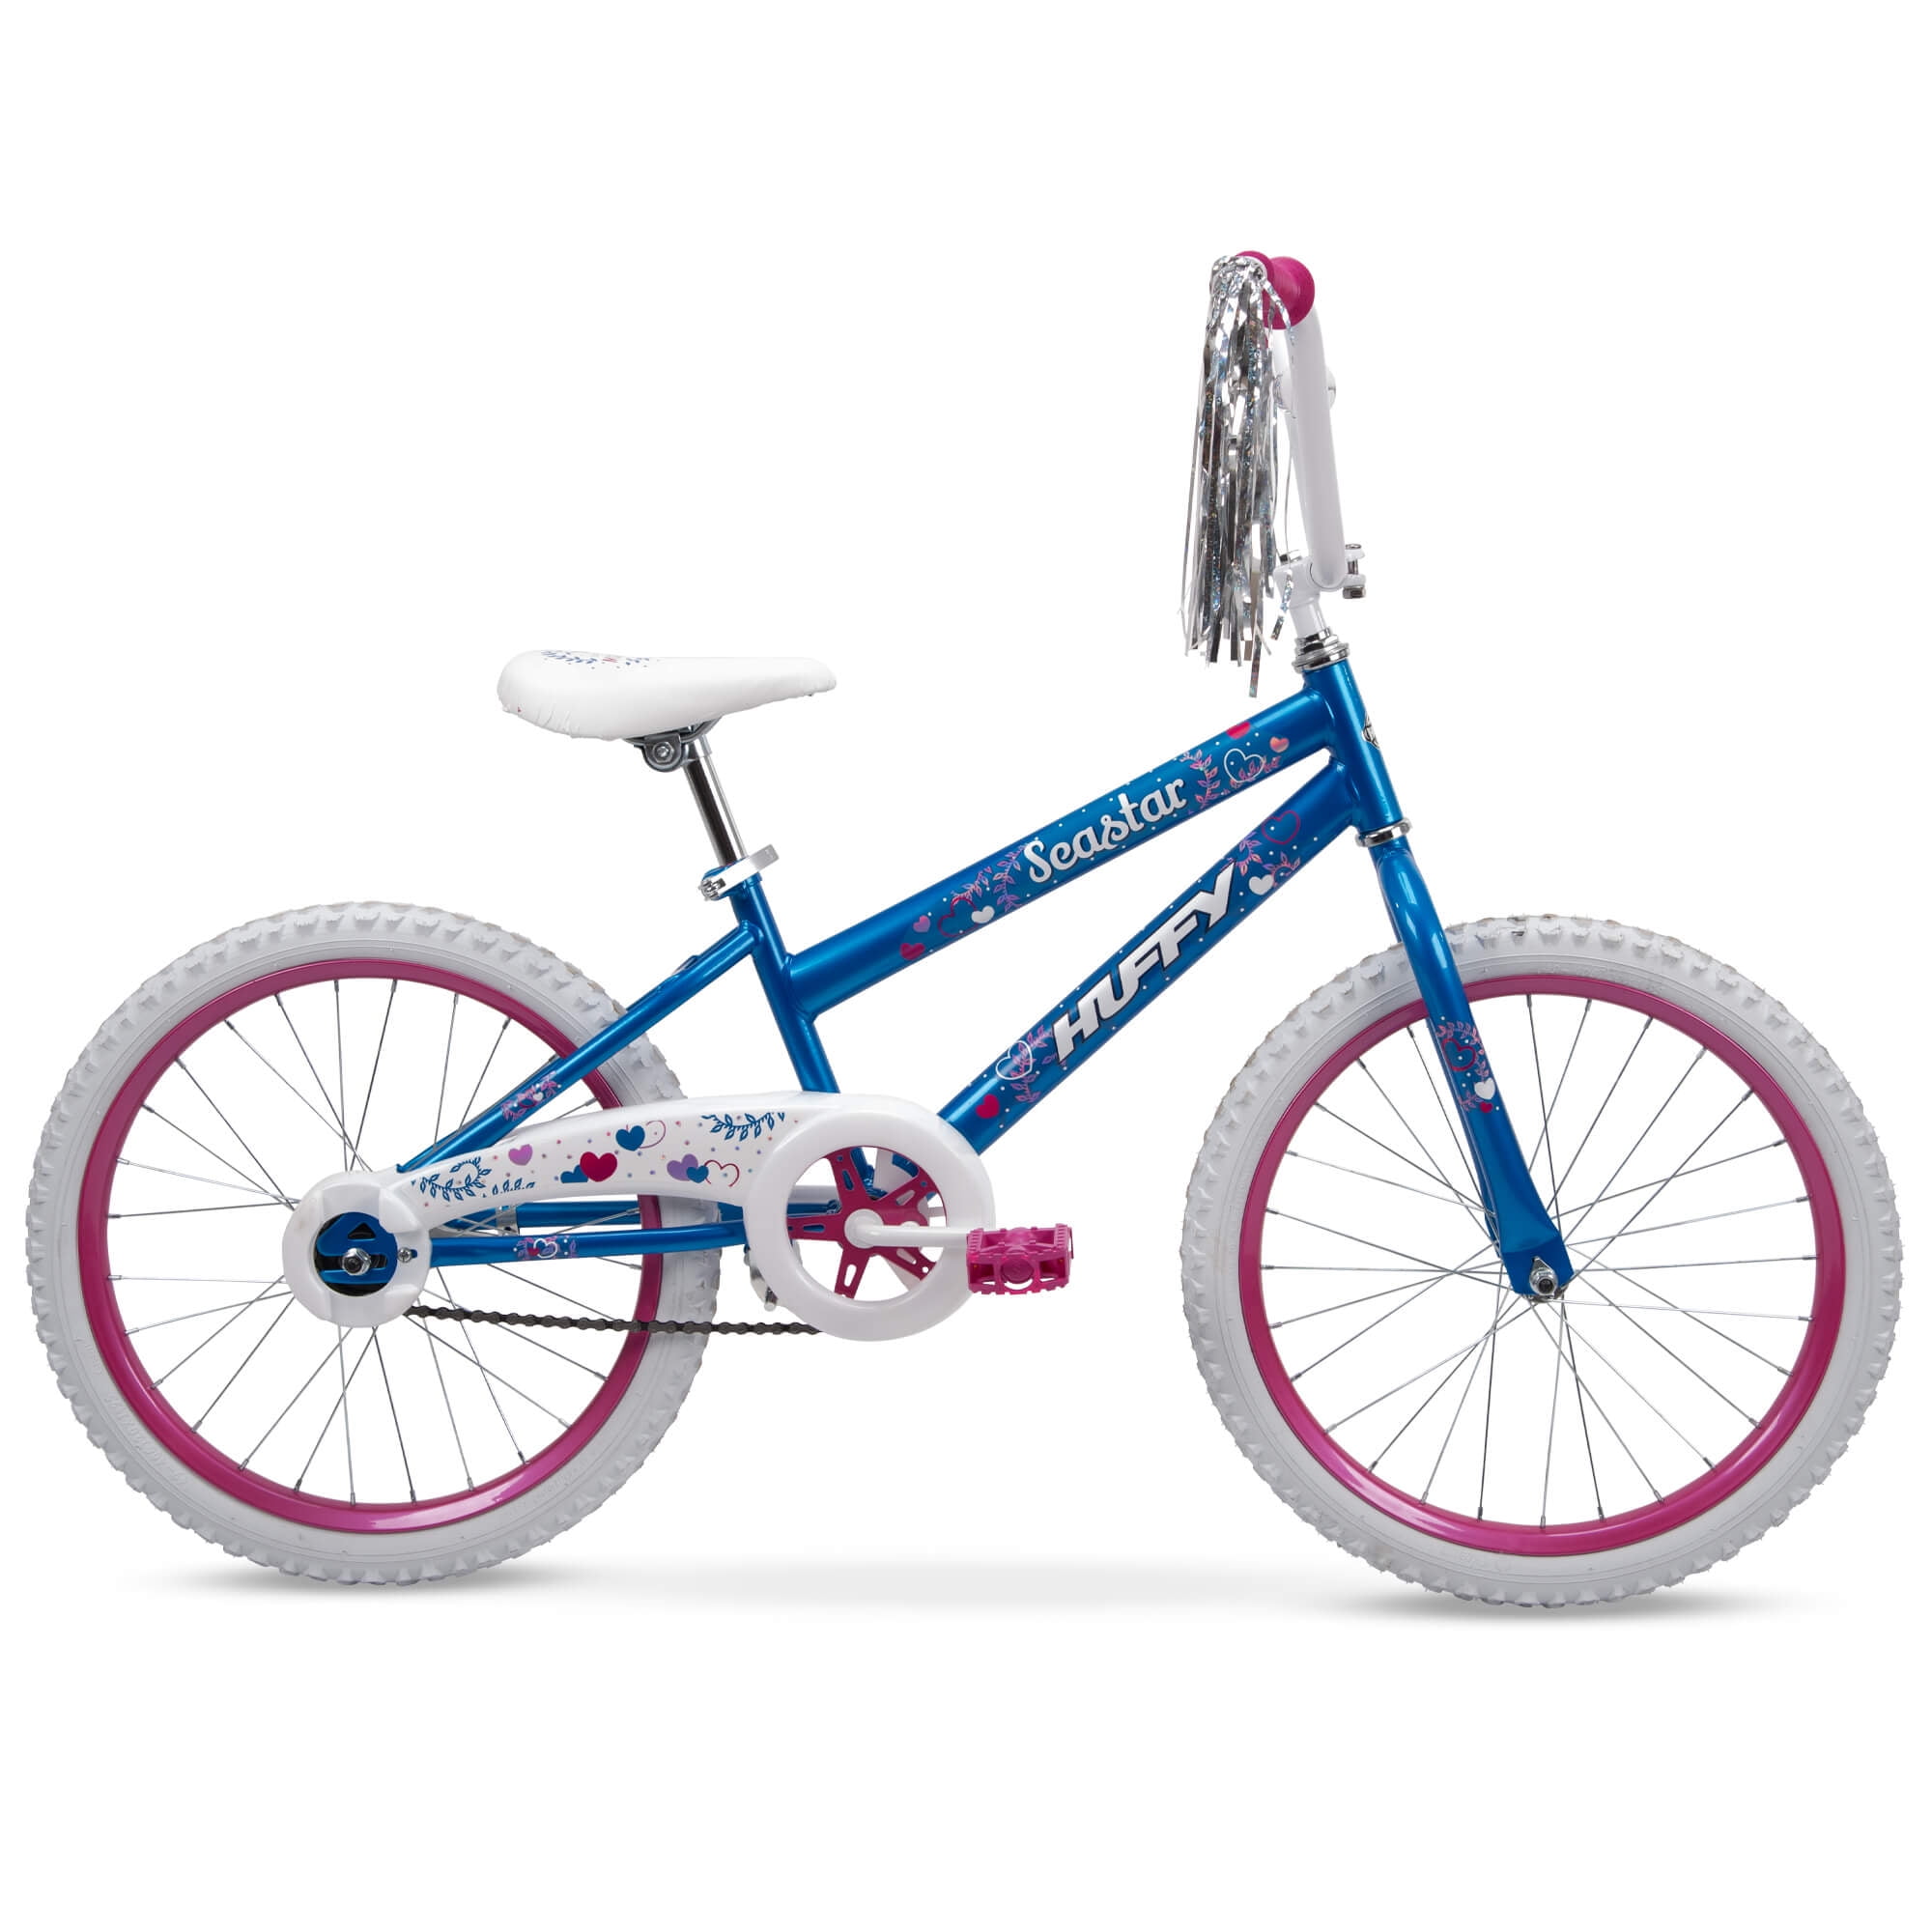 Huffy 20 in. Sea up, Bike Kids 5 and for Pink Ages Blue Star and Child, Girls